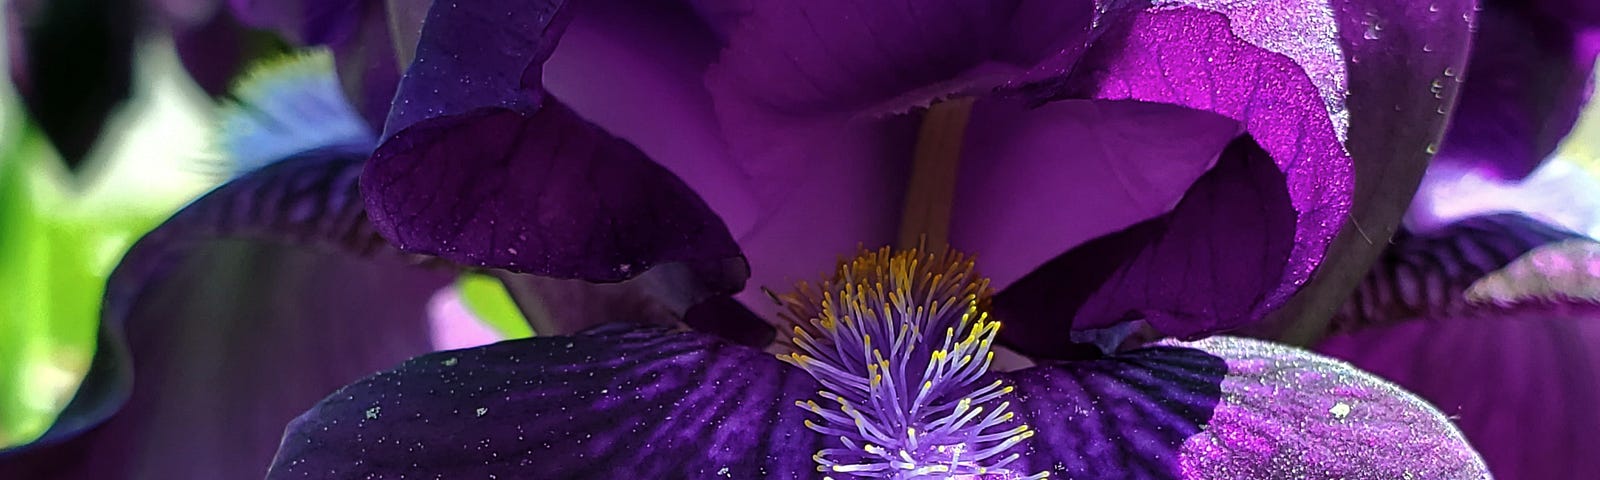 Close-up view of a two-toned purple iris with a hair-like beard of yellow, purple, and white running from the middle of the bottom petal toward the inner part of the flower.